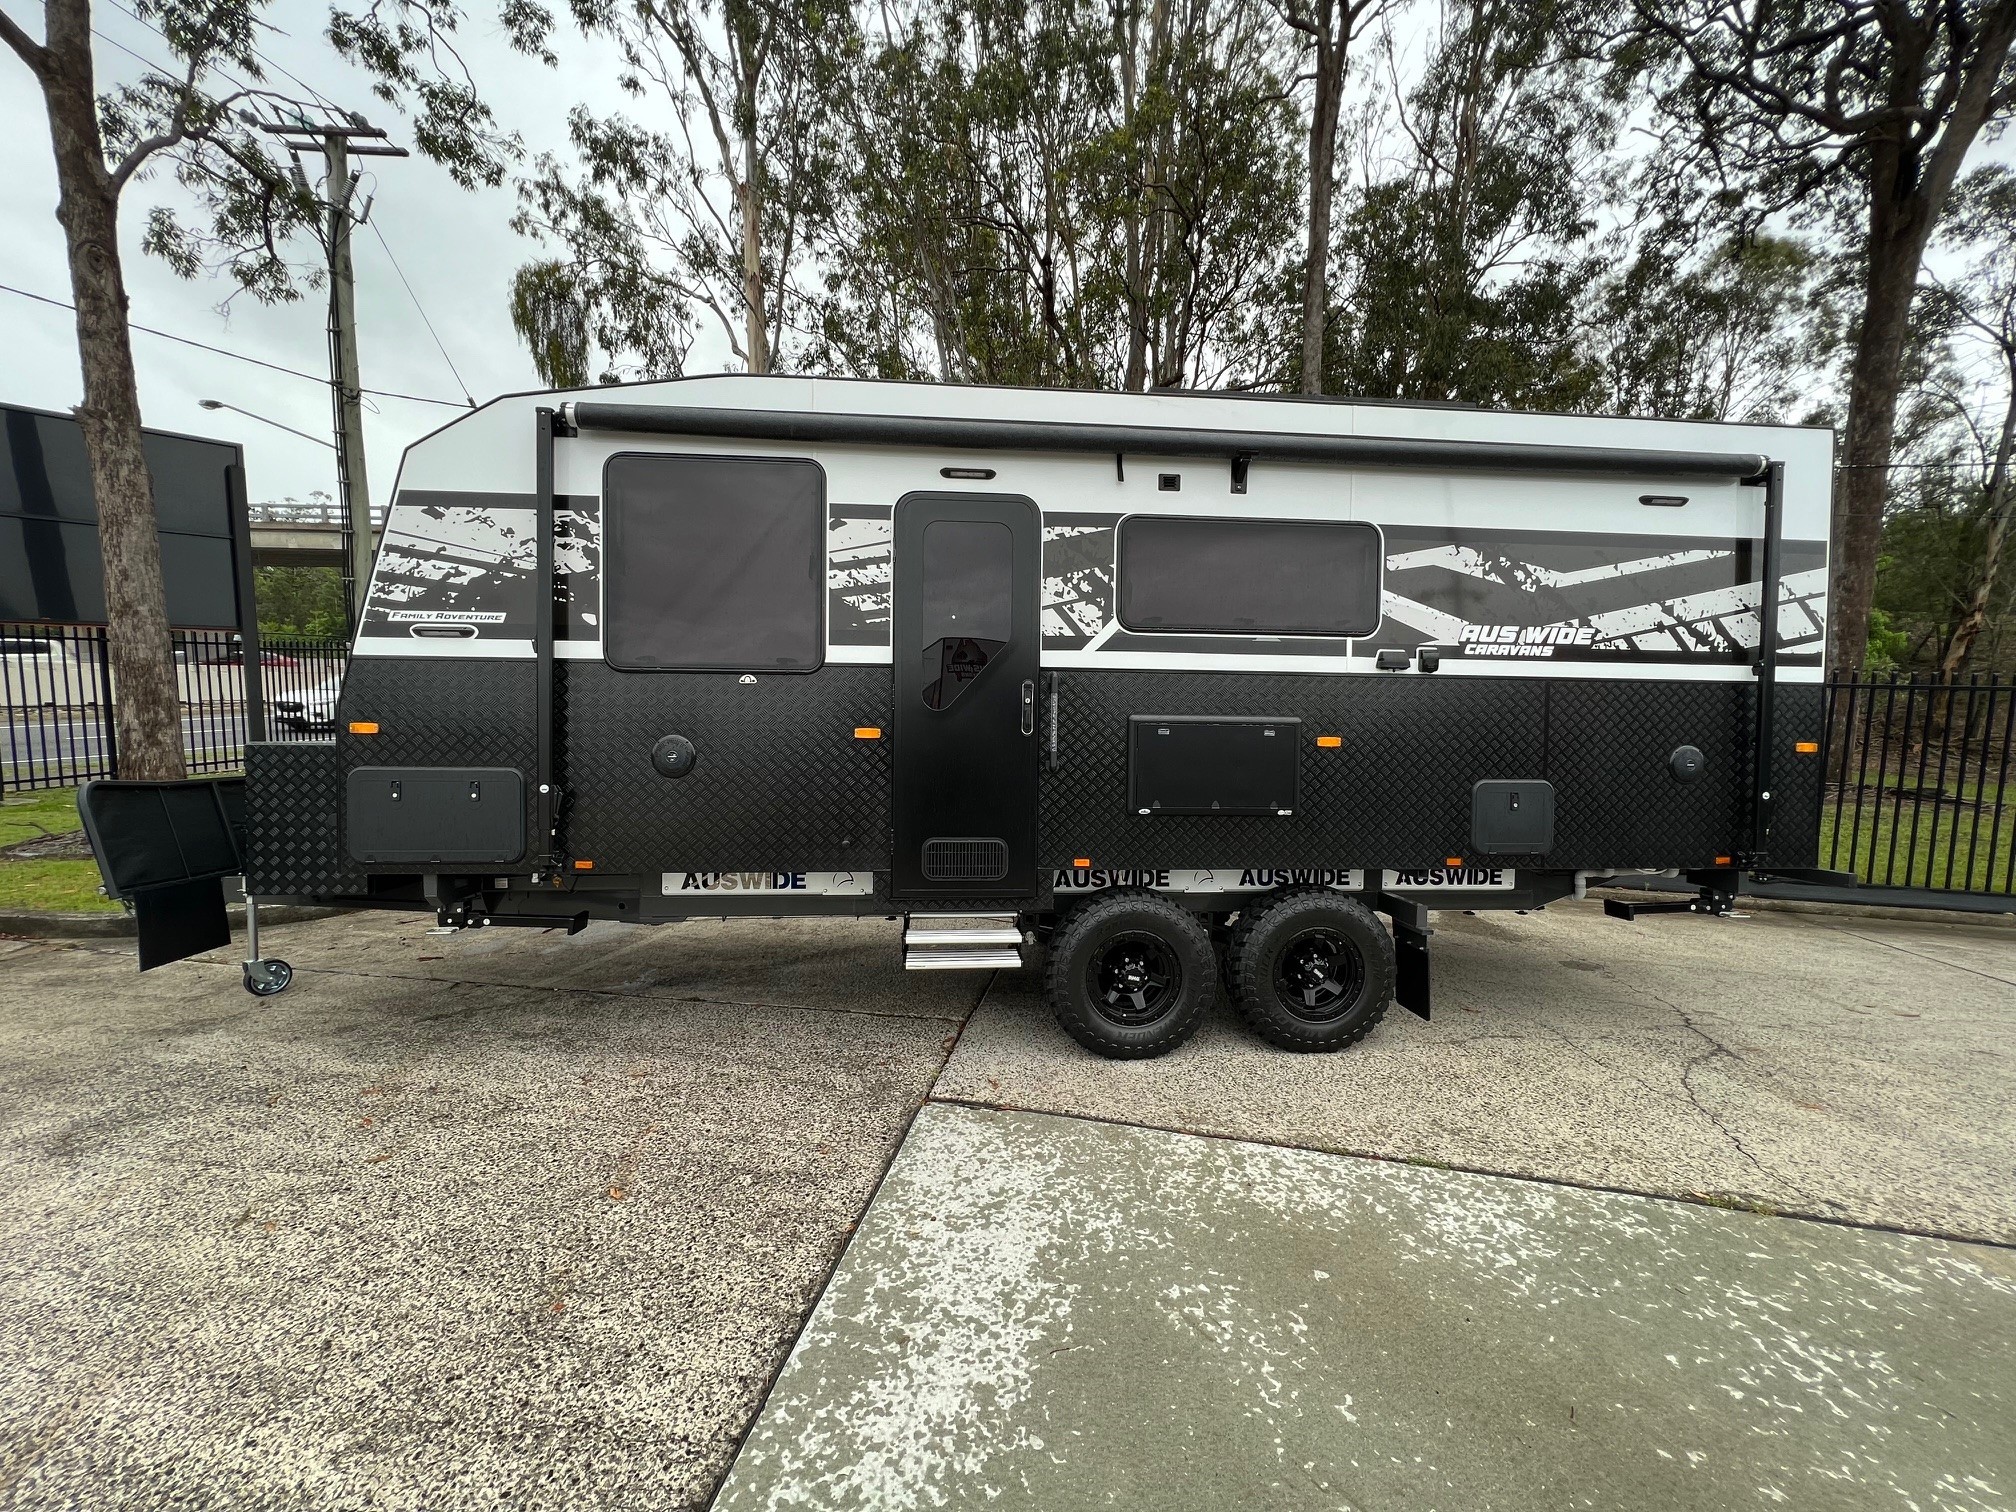 2024 Auswide 22ft Offroad Double Bunk Caravan With Truss Chassis